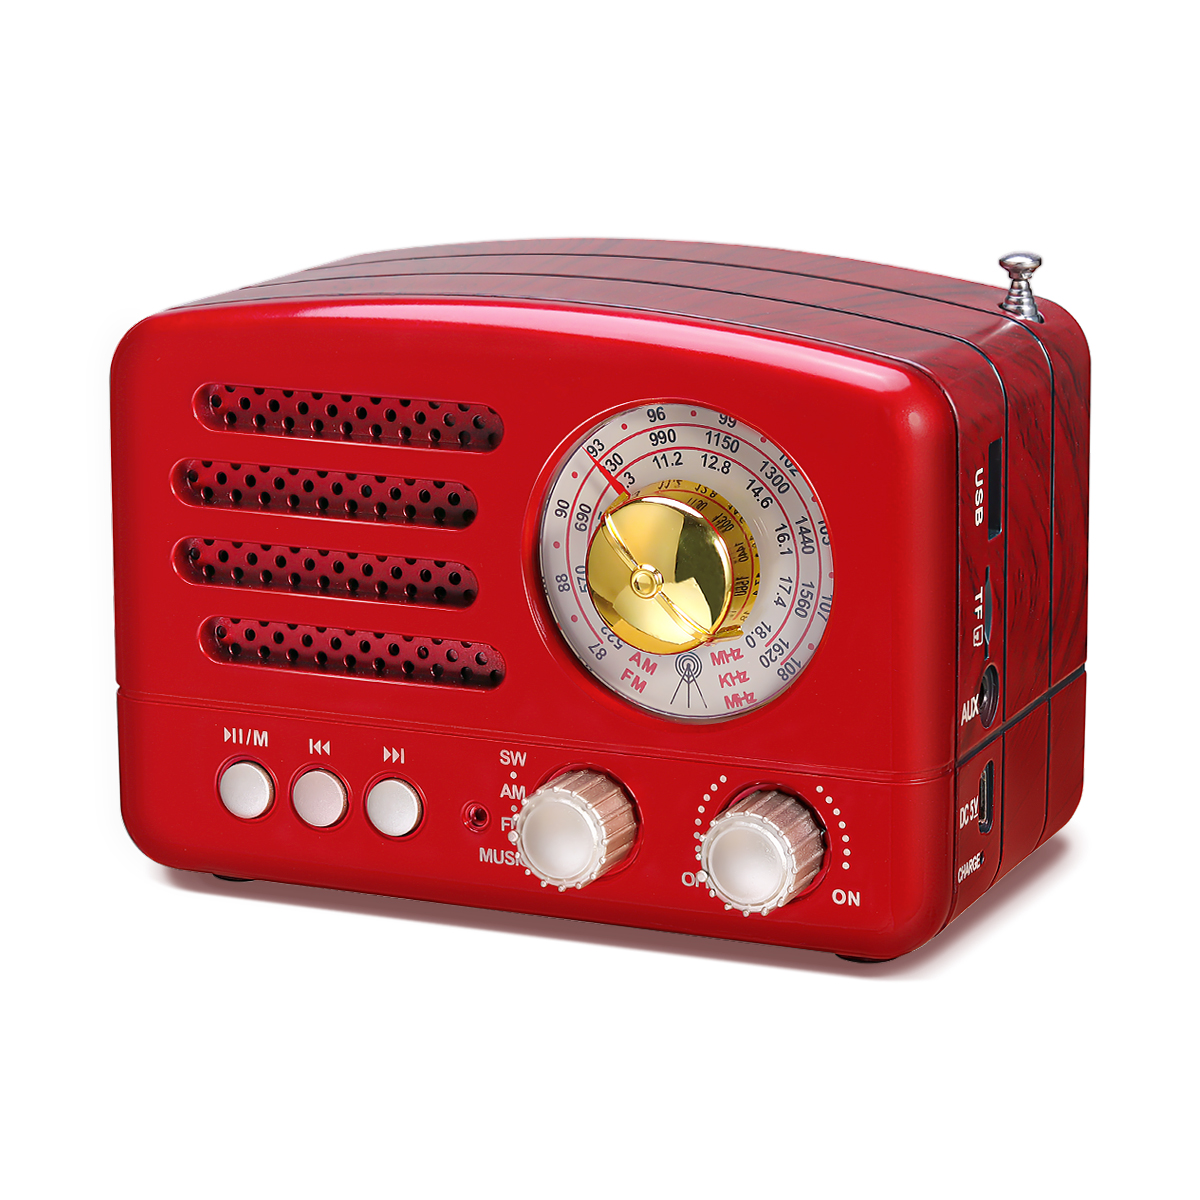 PRUNUS J-160 Portable Retro Radio Transistor with Bluetooth Speaker, AM FM  SW Small Radio Vintage,upgrade 1800mAh Rechargeable Battery  Operated,Supports TF Card/AUX/USB MP3 Player